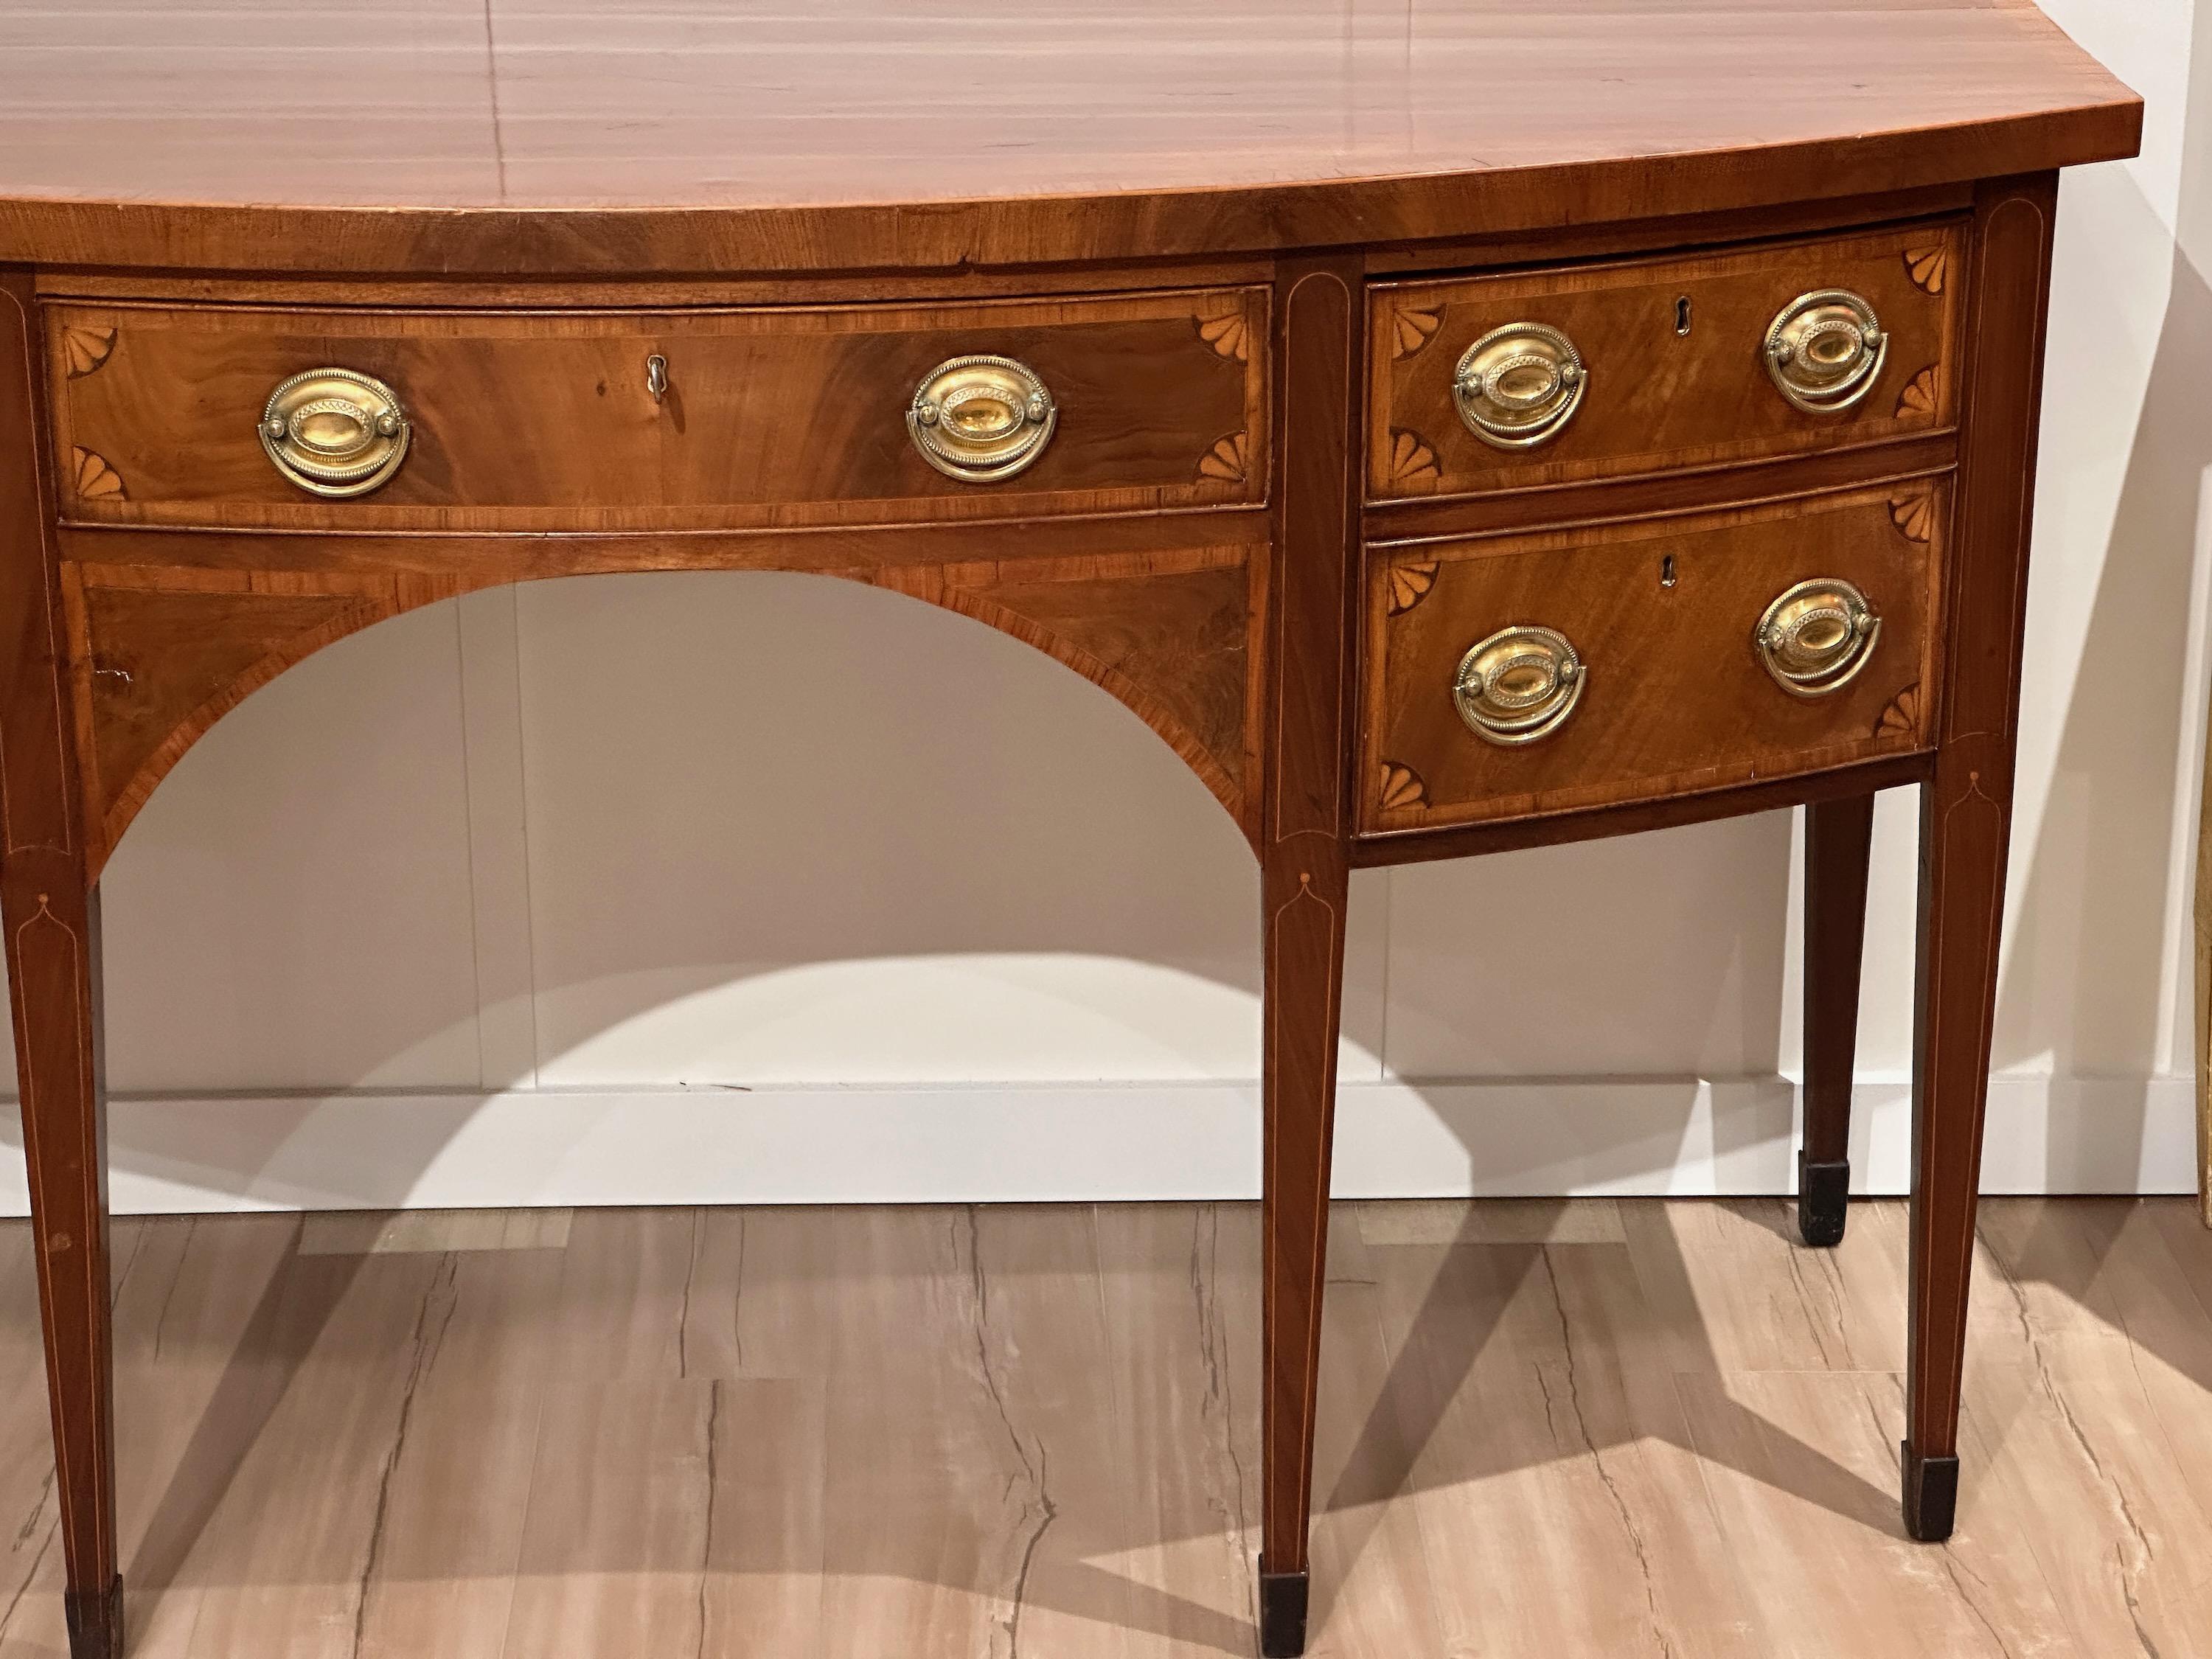 An English George III bowfront sideboard in mahogany with corner fan satinwood inlay and original oval gilt brass pulls, a central frieze drawer, flanked on the left with double drawers and on the right with a deep bottle drawer, all supported by